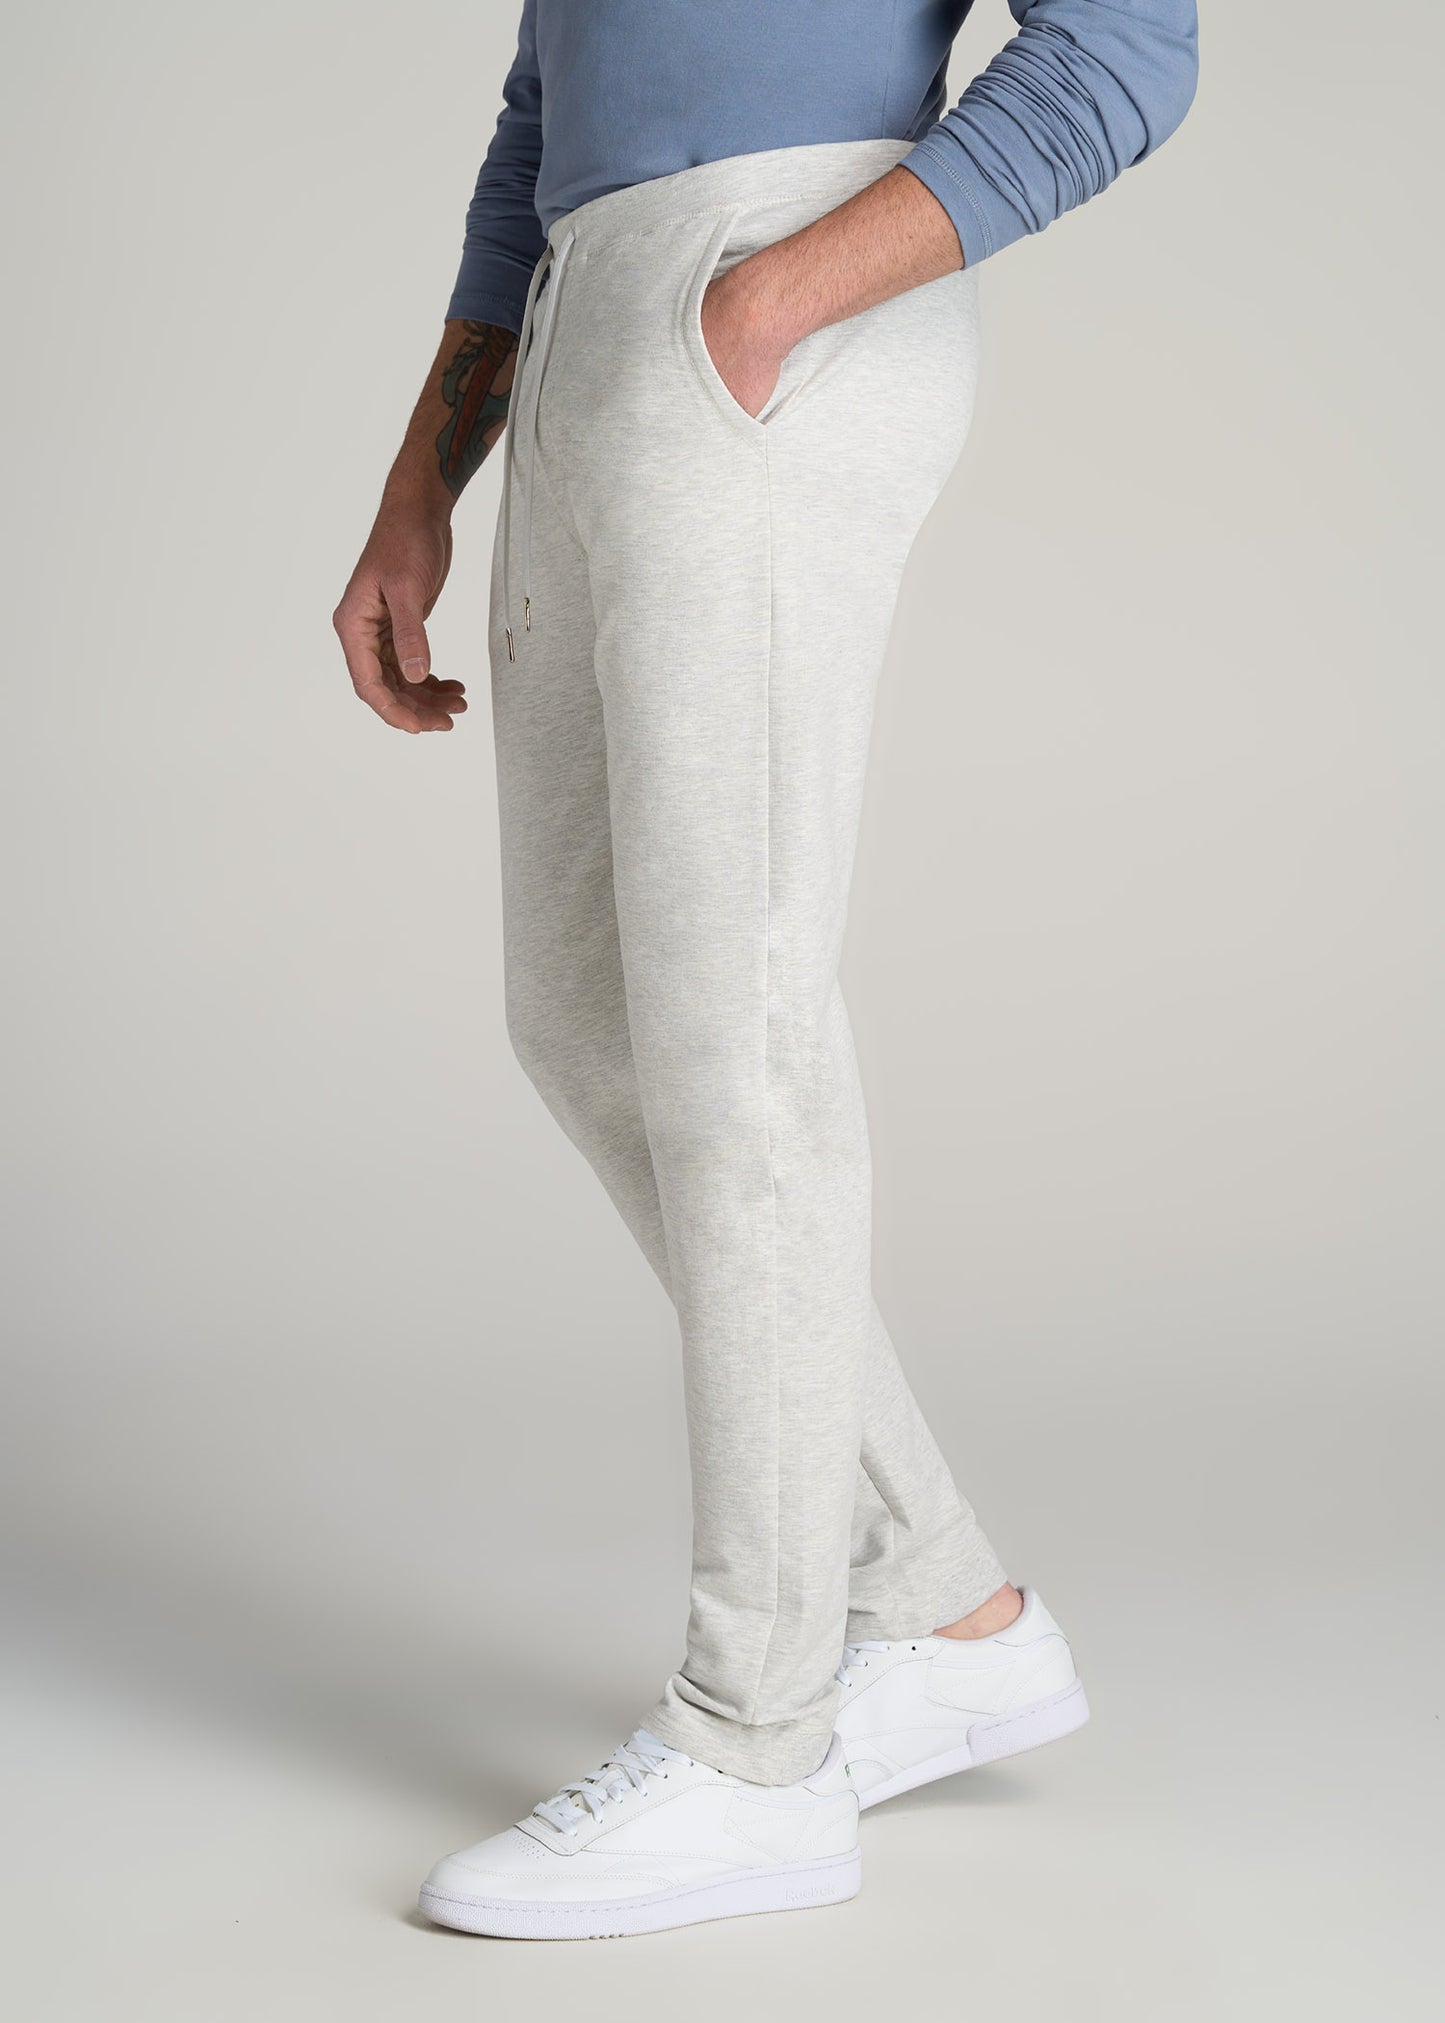 Men's Tall French Terry Sweatpants: Grey Mix Sweatpants